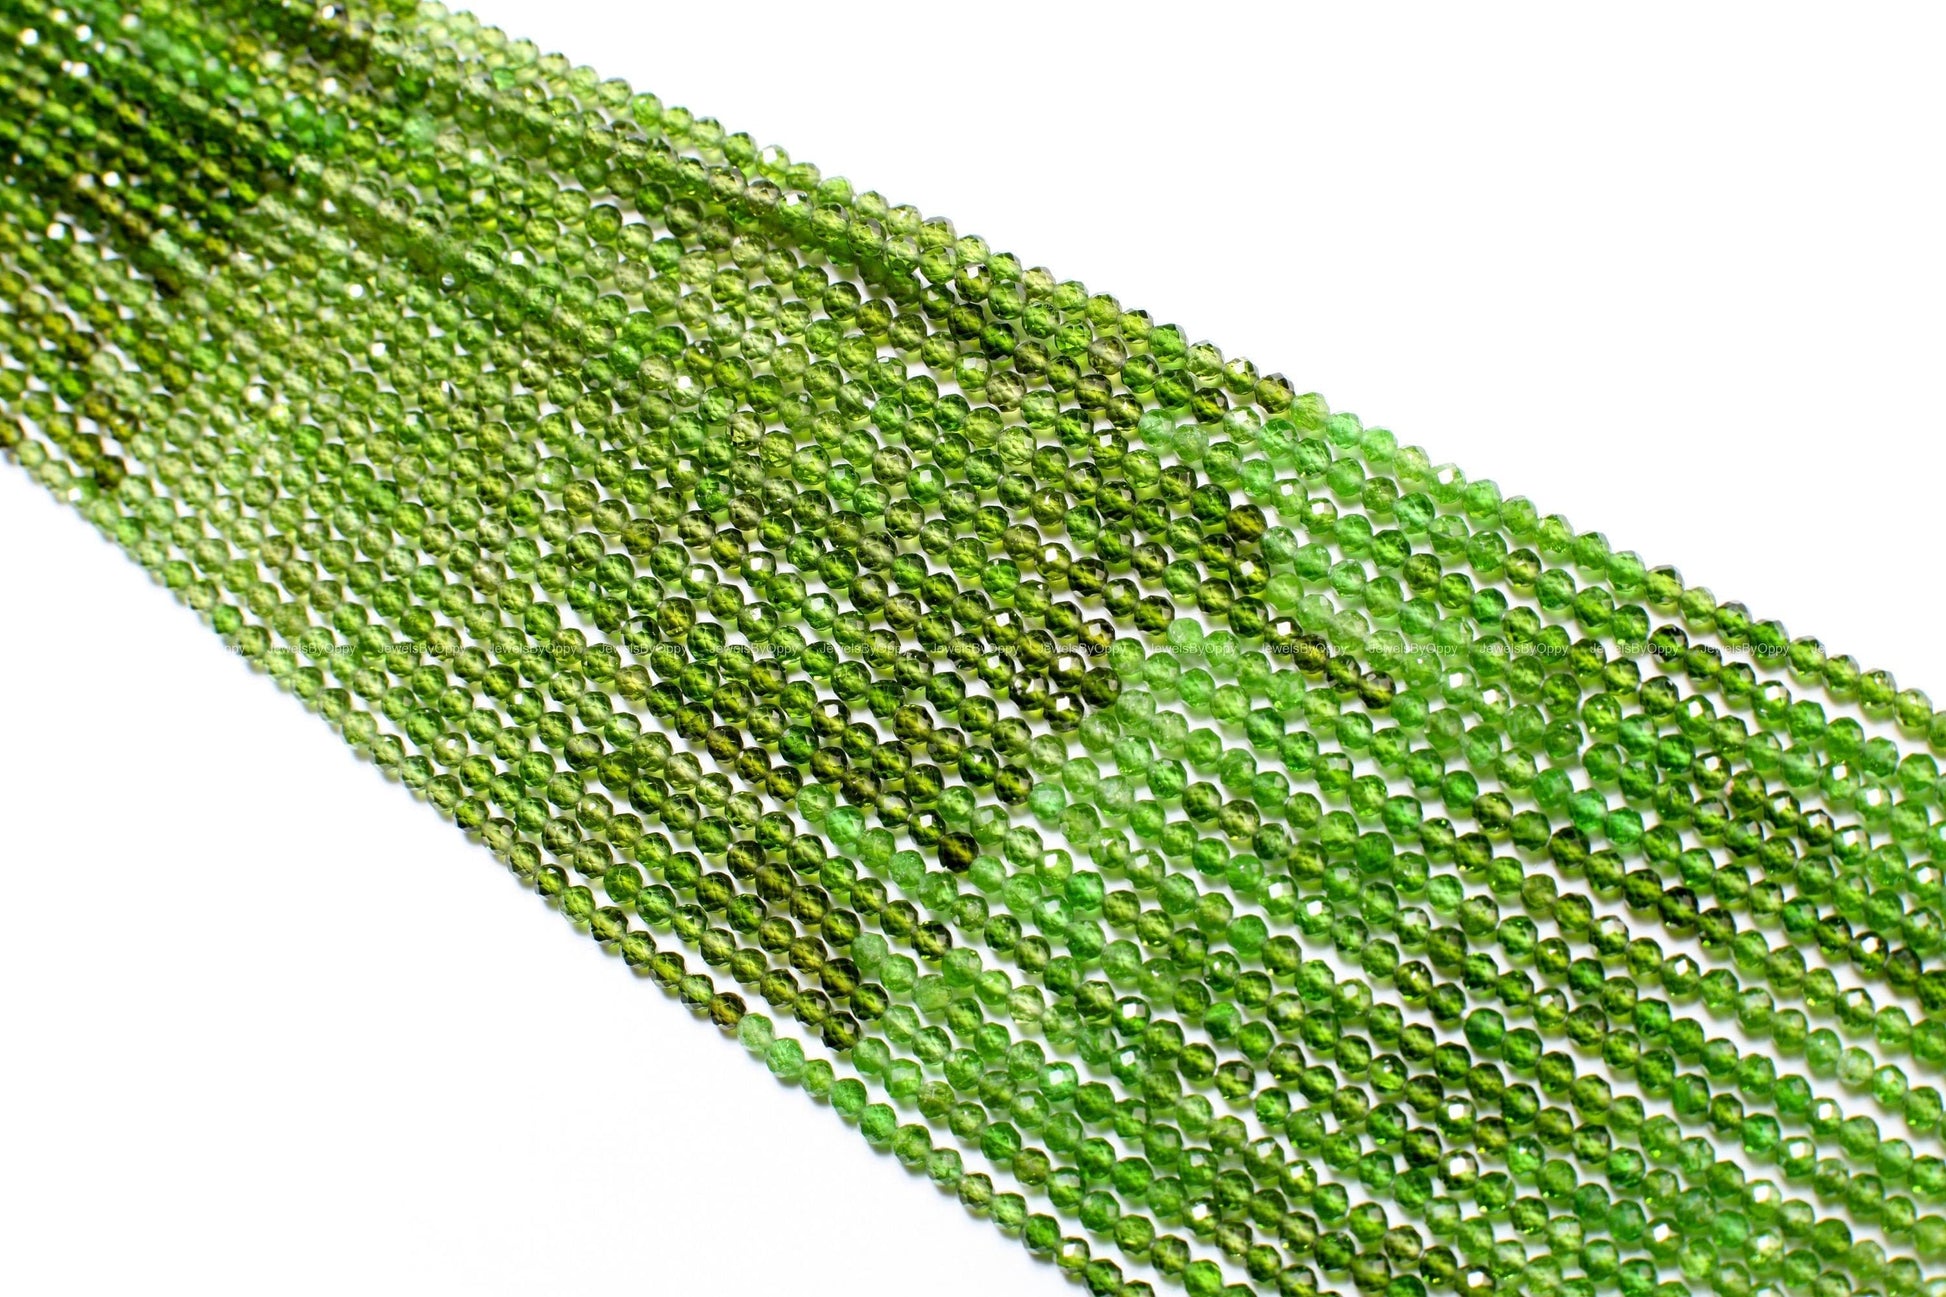 Natural Chrome Tourmaline 2.5mm Micro Faceted Round Beads 12.5&quot; Strand, AAA High Quality Shaded Chrome Tourmaline,Rare Green Indicolite Bead